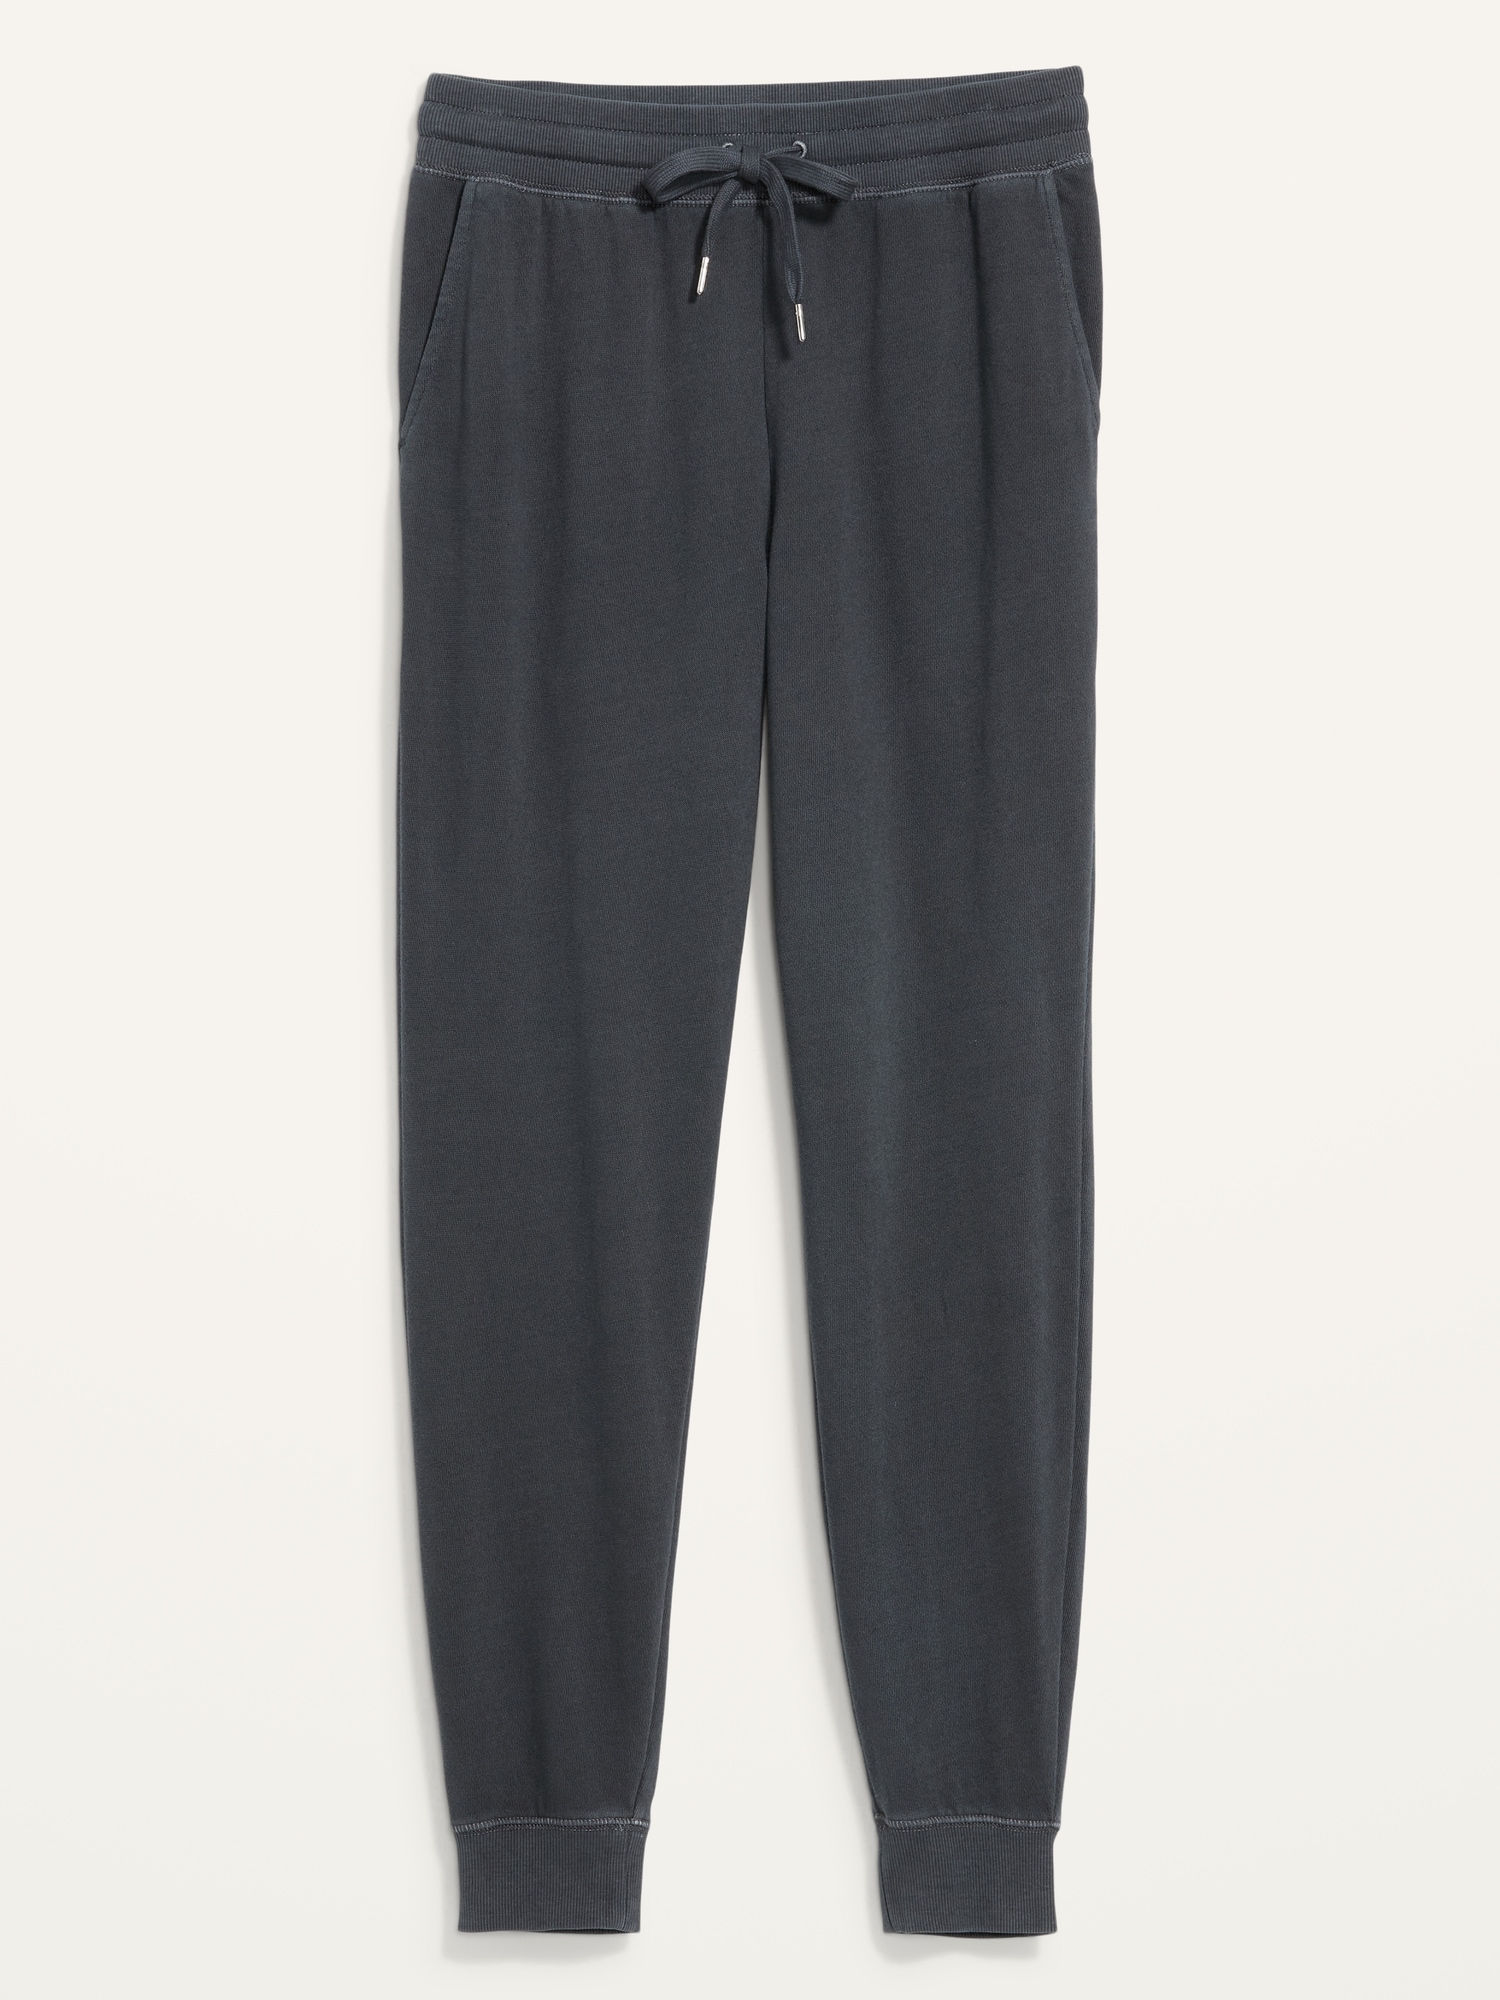 OLD Navy HIGH Waisted GARMENT Dyed STREET Jogger SWEATPANTS Pants XS New  NWT!